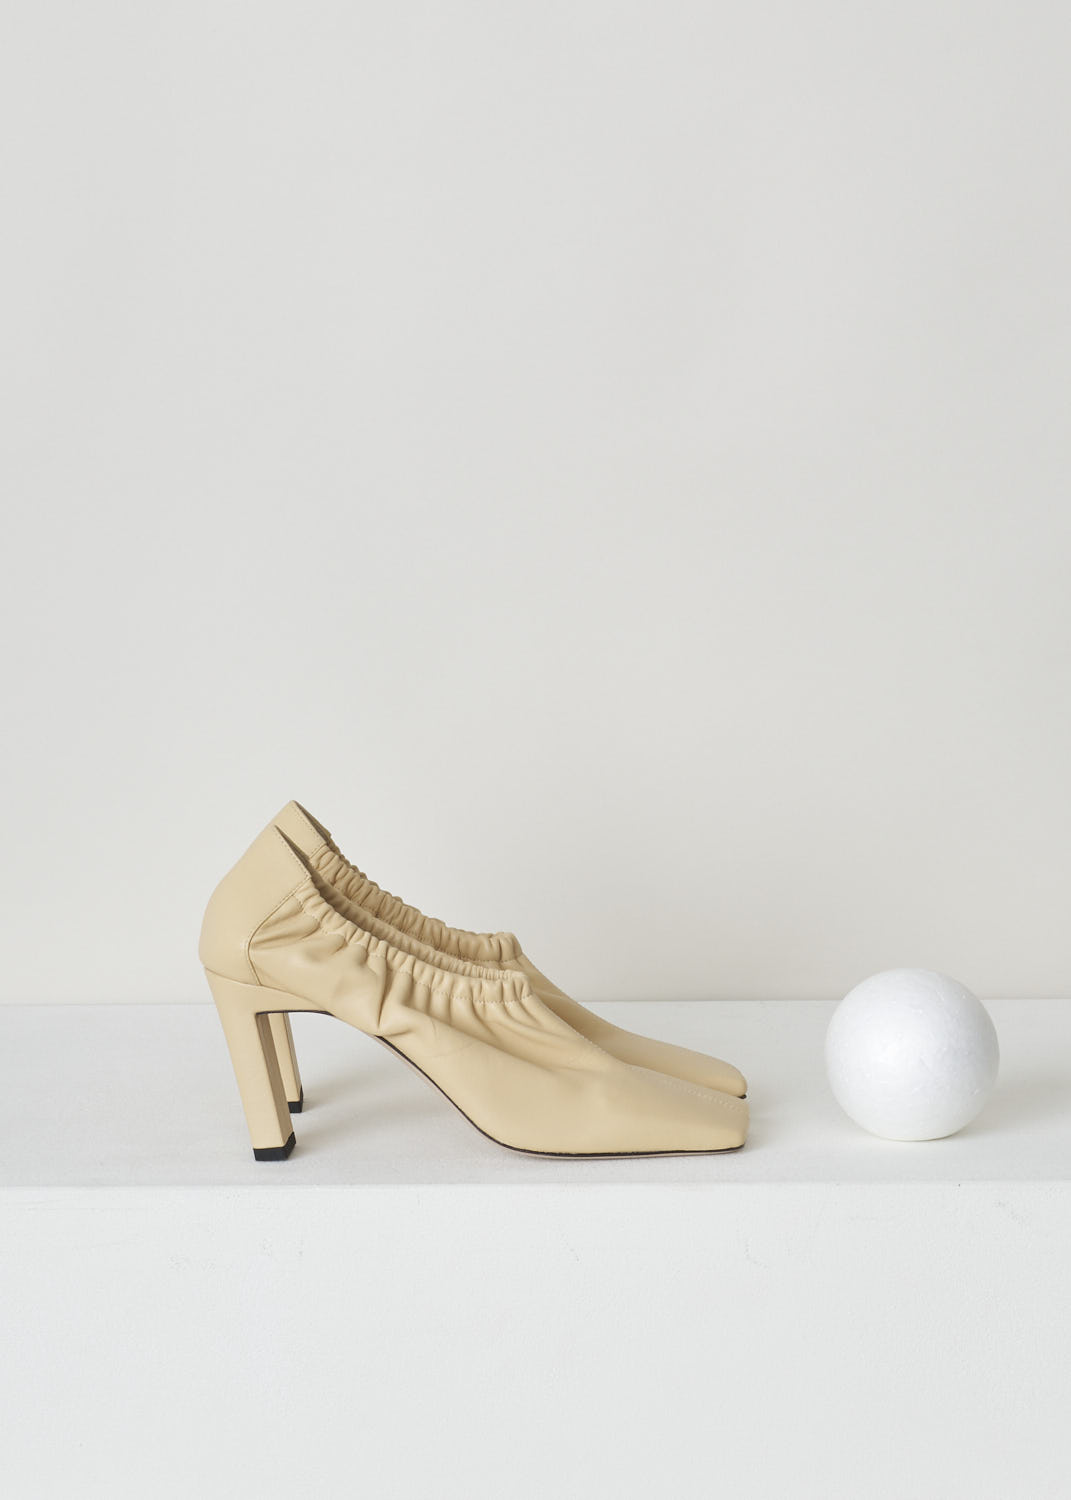 WANDLER, NUDE HEELED MULE WITH ELASTICATED DETAIL, MIA_MULE_21204_221201_1256_CASHEW, Beige, Side, These nude slip-on mule feature a gathered/wrinkled elasticated band around the ankle, a square toe and a block heel.

Heel height: 8.5 cm / 3.3 inch 
